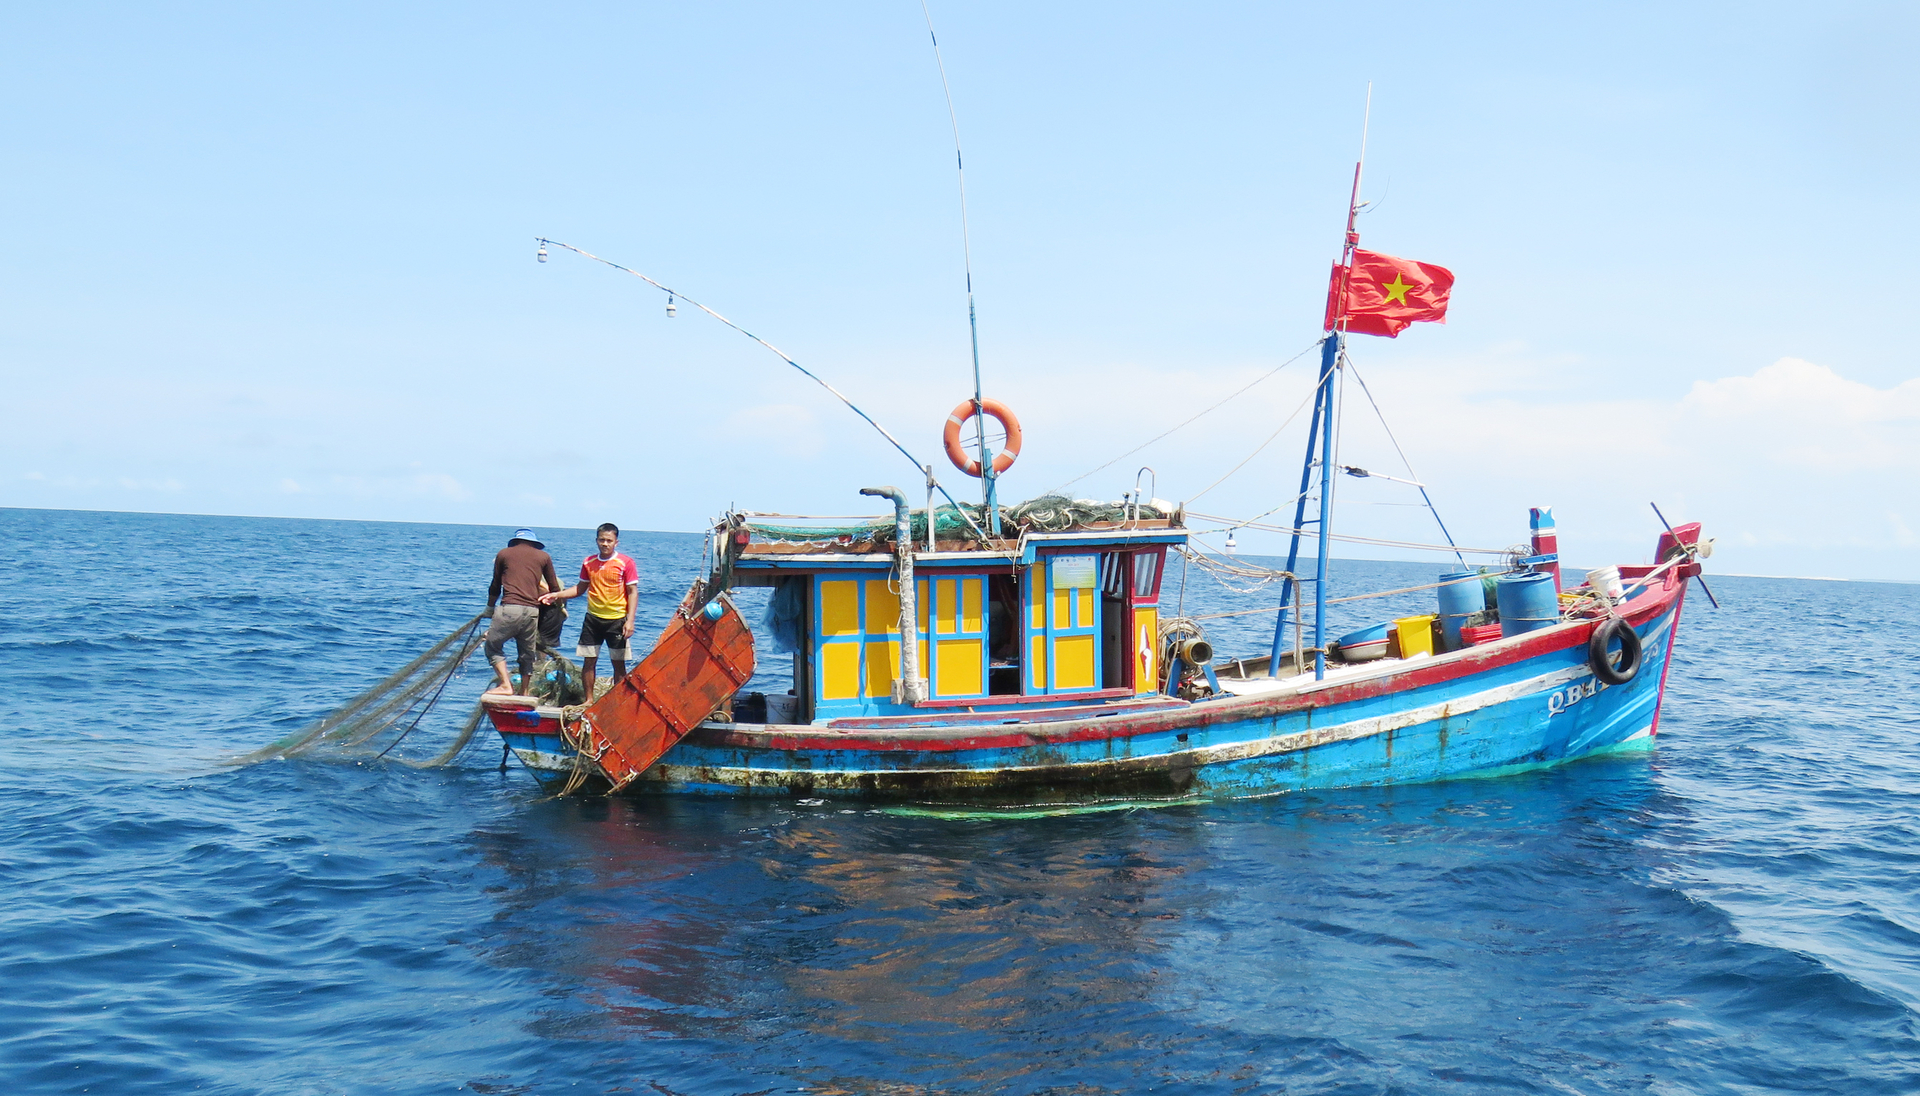 Fishing vessels engaged in fishing activities in the wrong route, violating the Law on Fisheries were discovered and handled accordingly afterward. Photo: T. Phung.